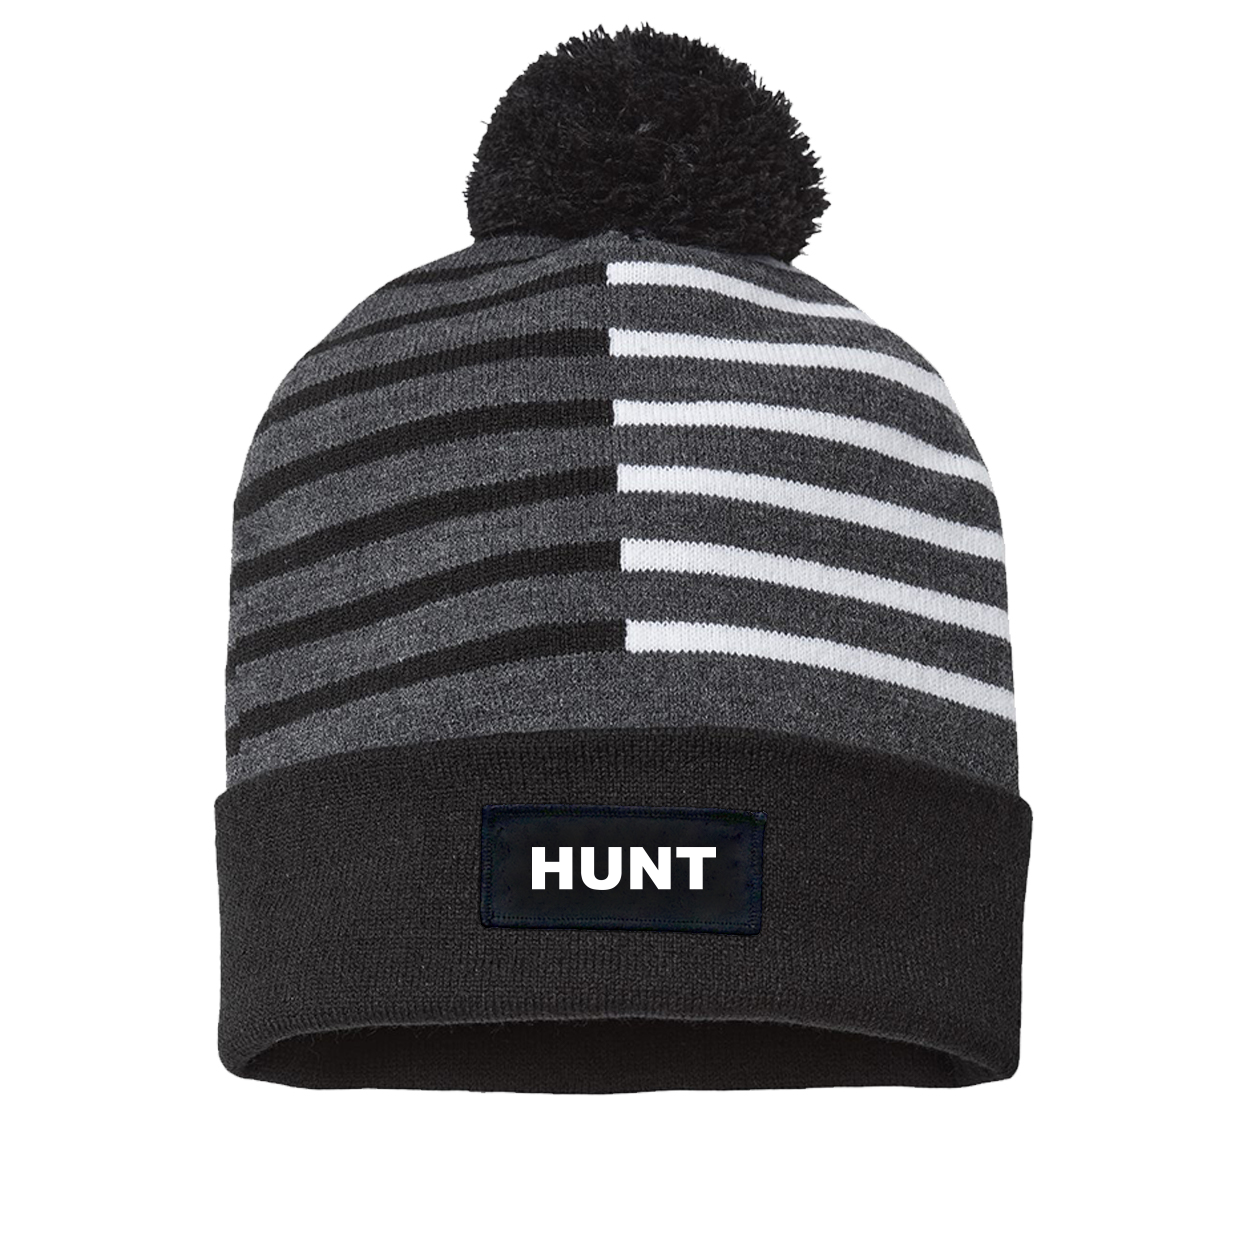 Hunt Brand Logo Night Out Woven Patch Roll Up Pom Knit Beanie Half Color Black/White